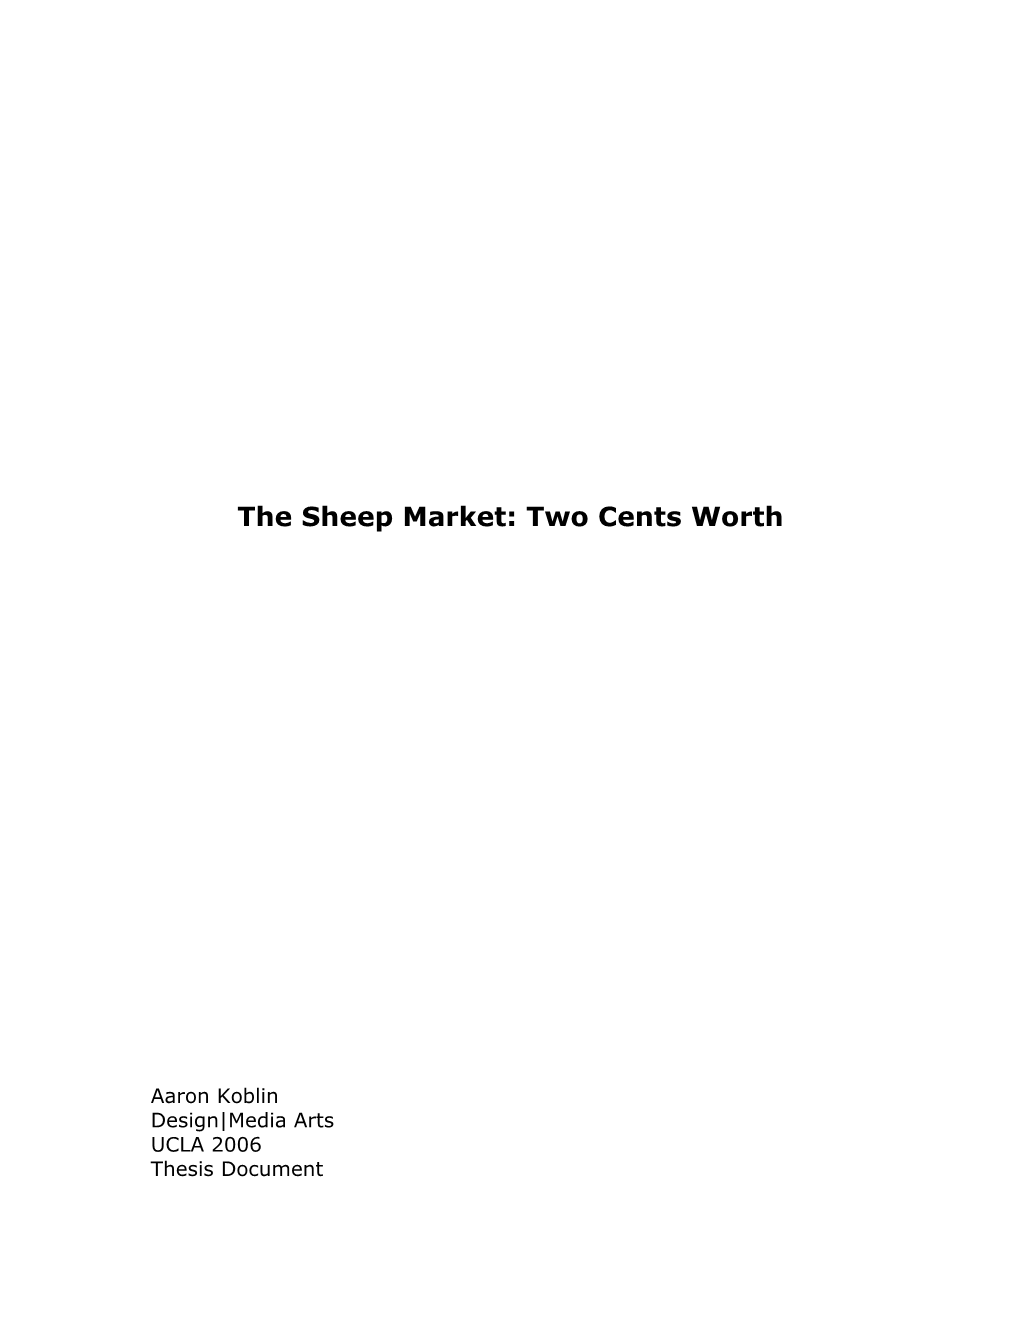 The Sheep Market: Two Cents Worth